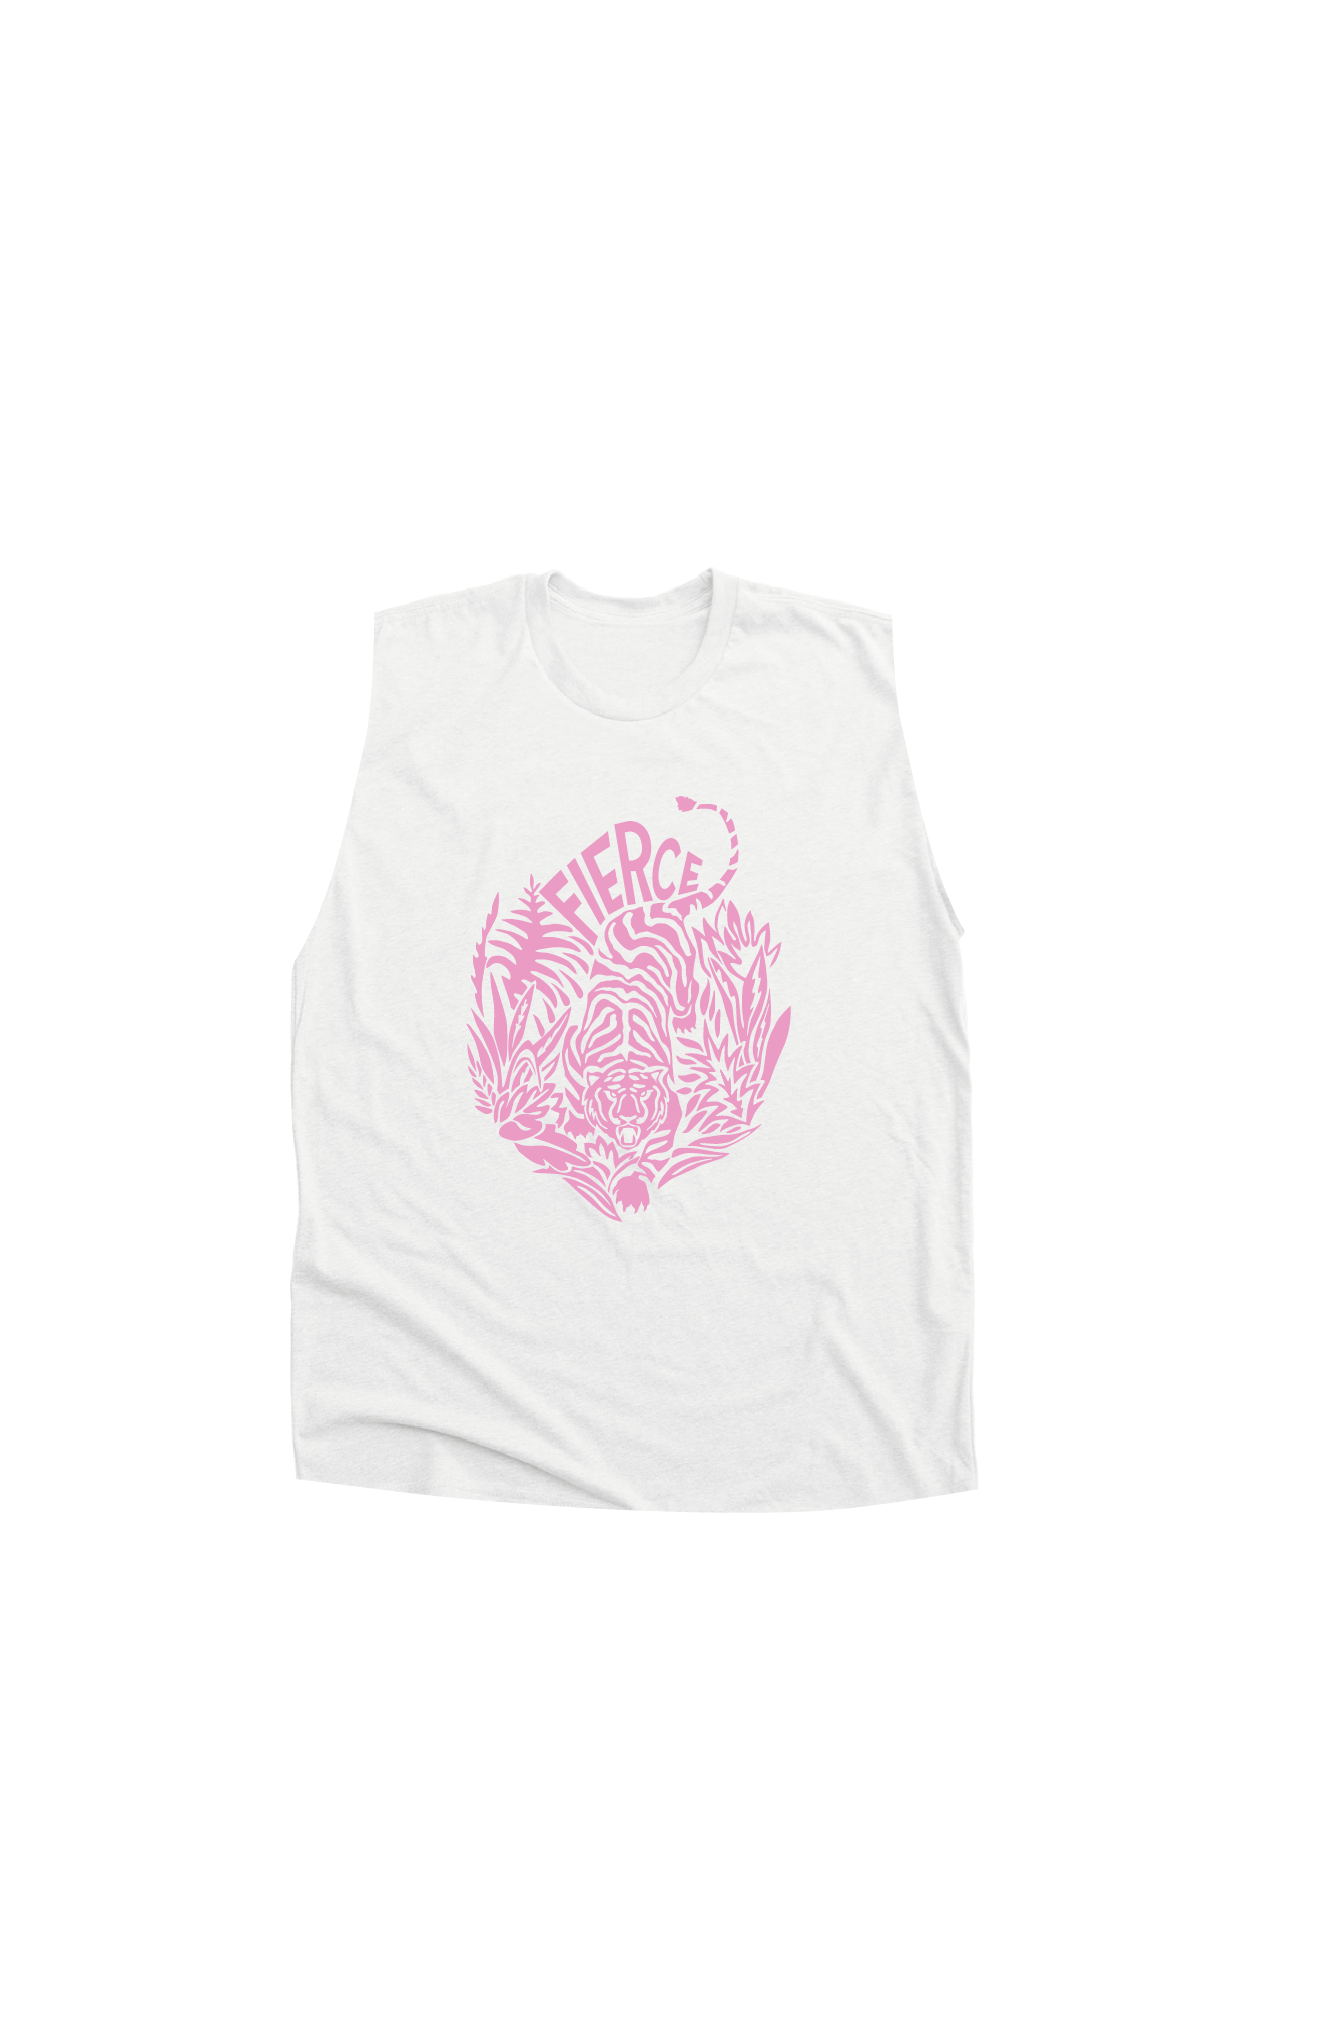 Ladies white tank top with a light pink print of a tiger on the front